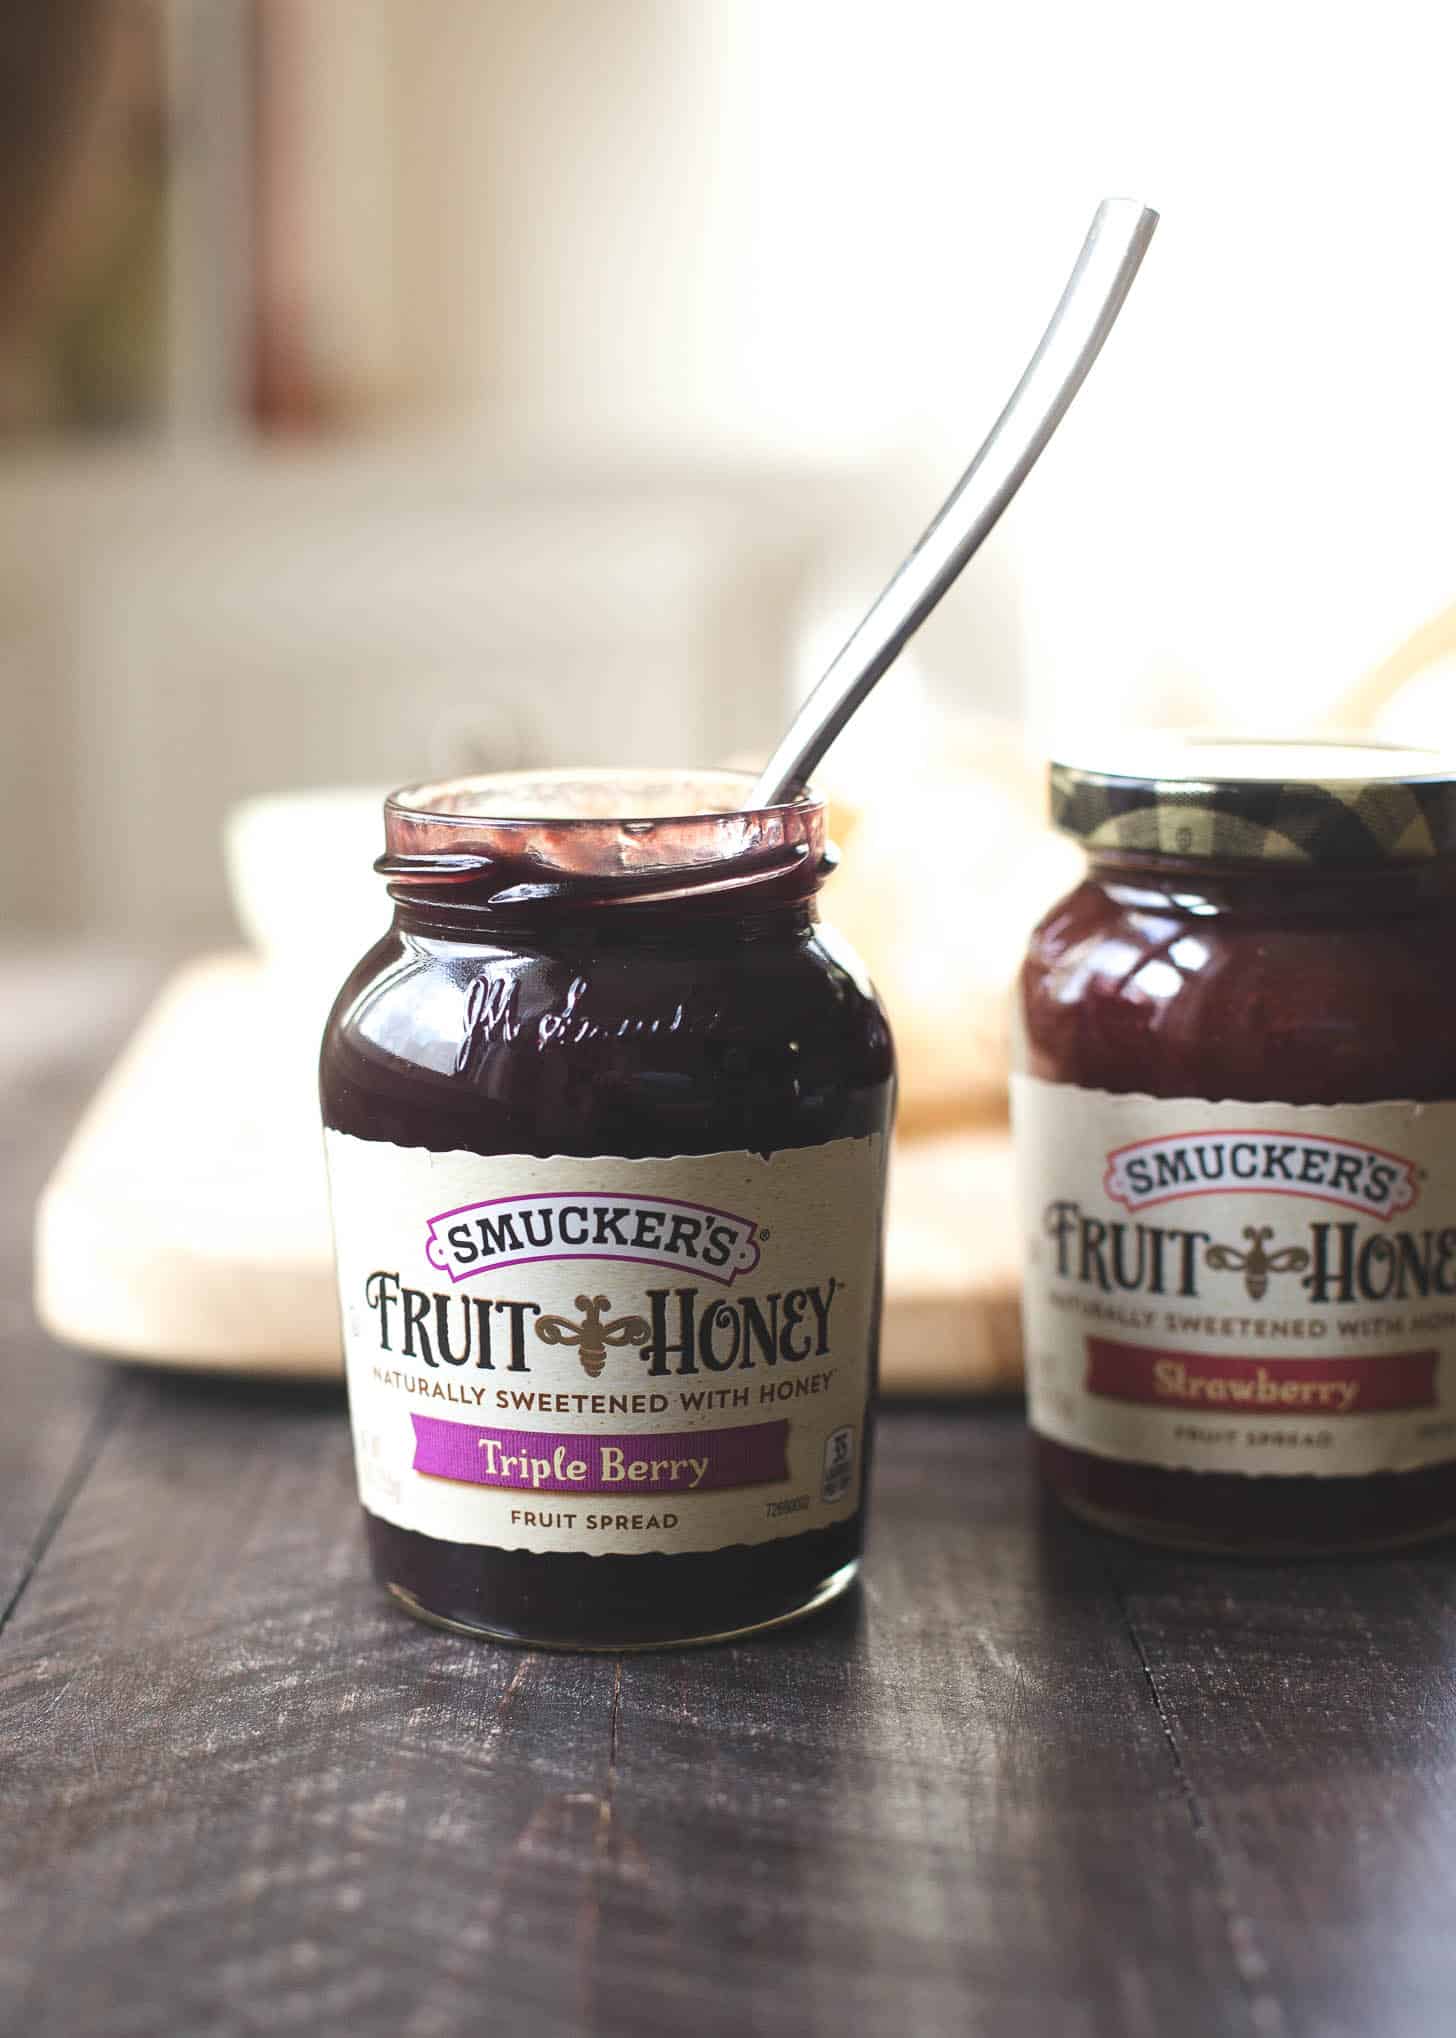 Smucker's Fruit and Honey spread